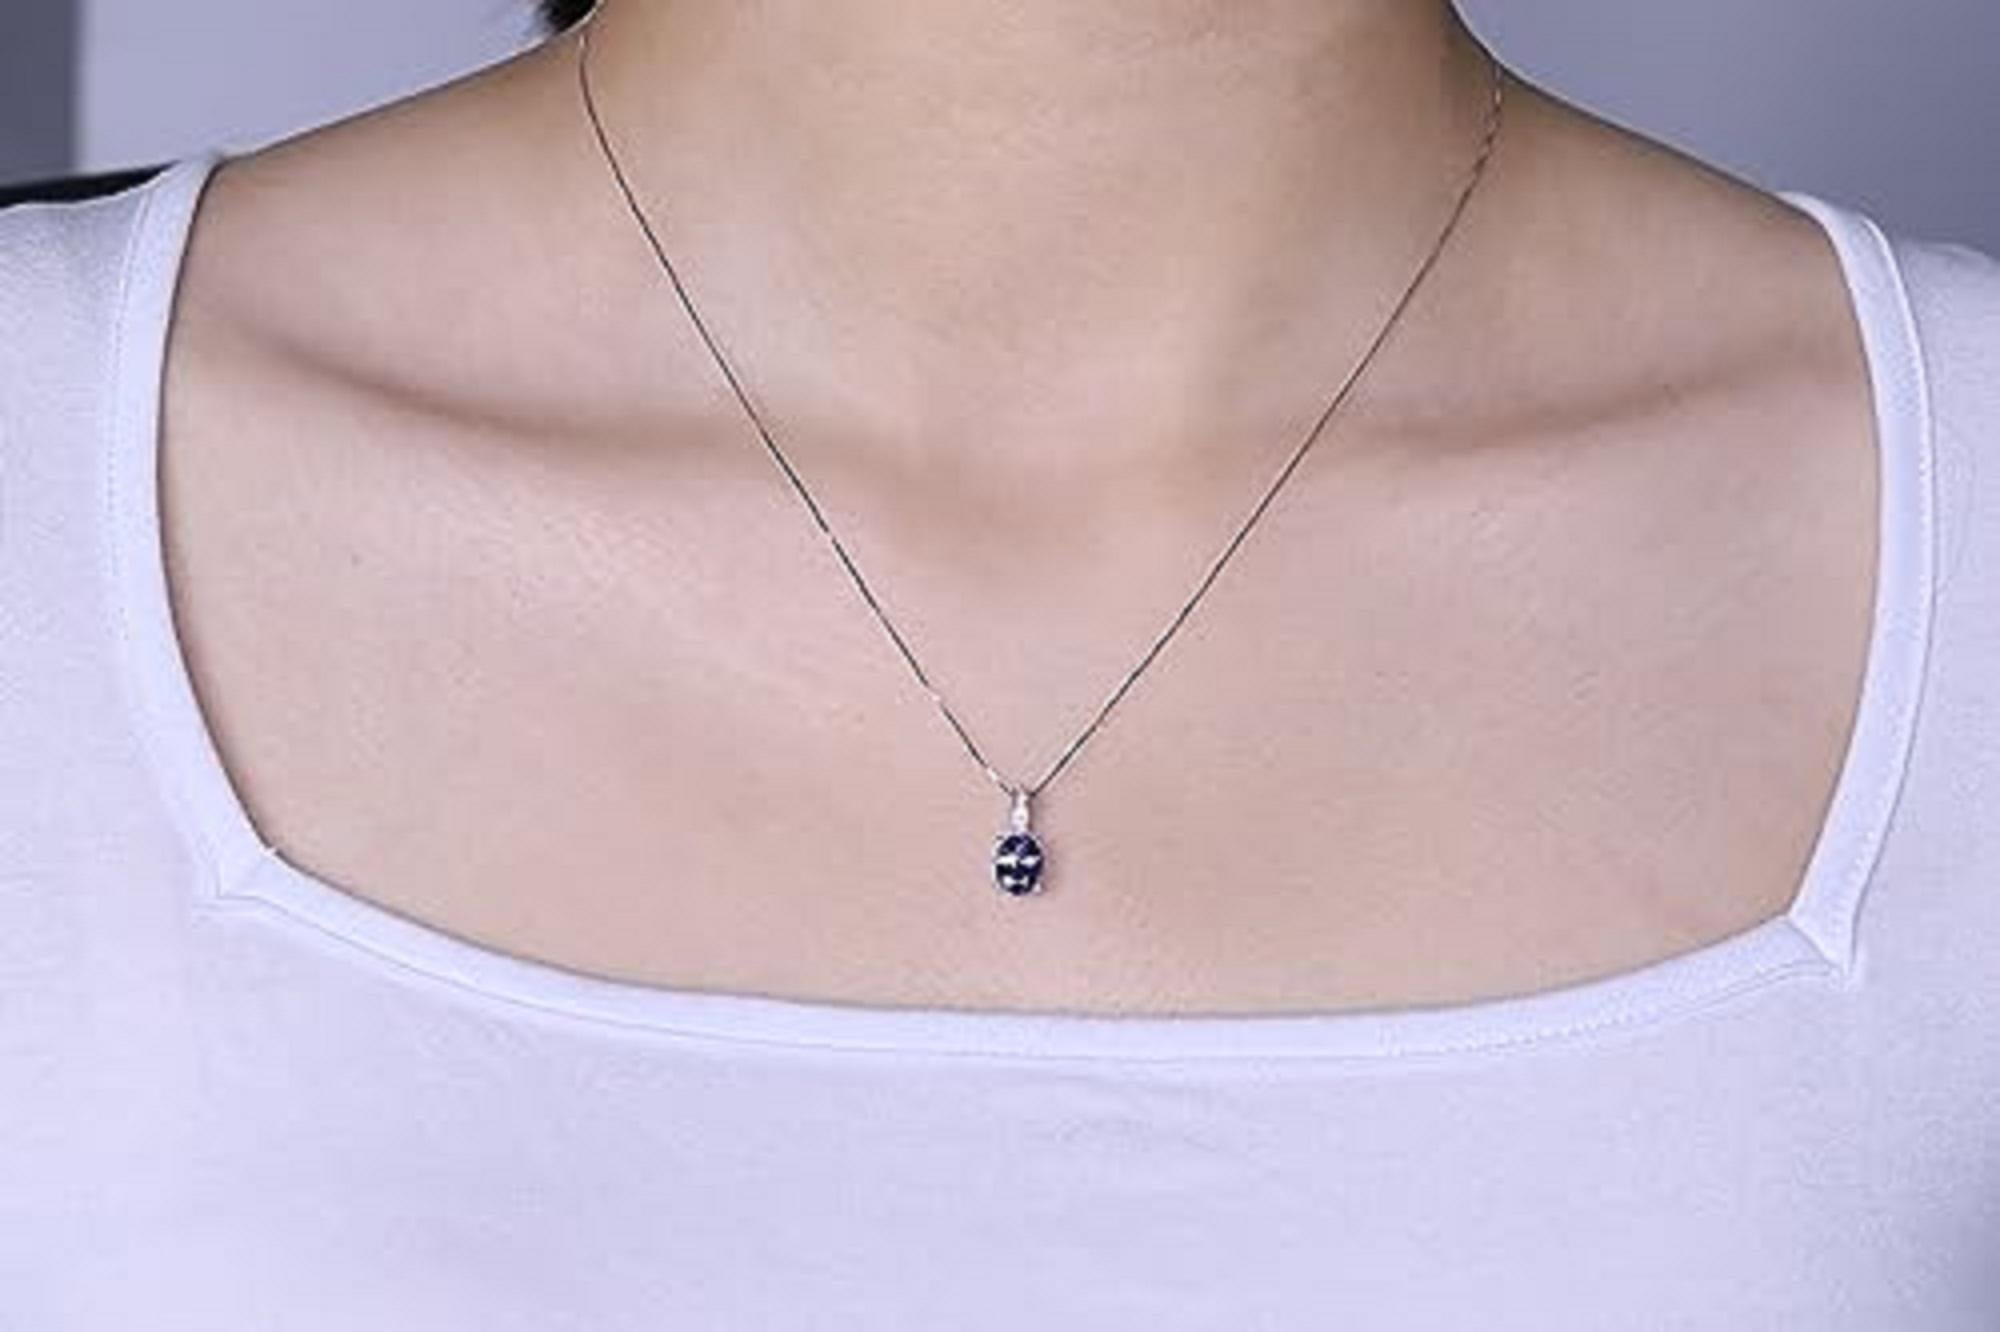 Decorate yourself in elegance with this Pendant is crafted from 14-karat White Gold by Gin & Grace Pendant. This Pendant is made up of 6*8 Oval-cut Prong setting Tanzanite (1 Pcs) 1.41 Carat and Round-Cut Prong setting White Diamond (4 Pcs) 0.03